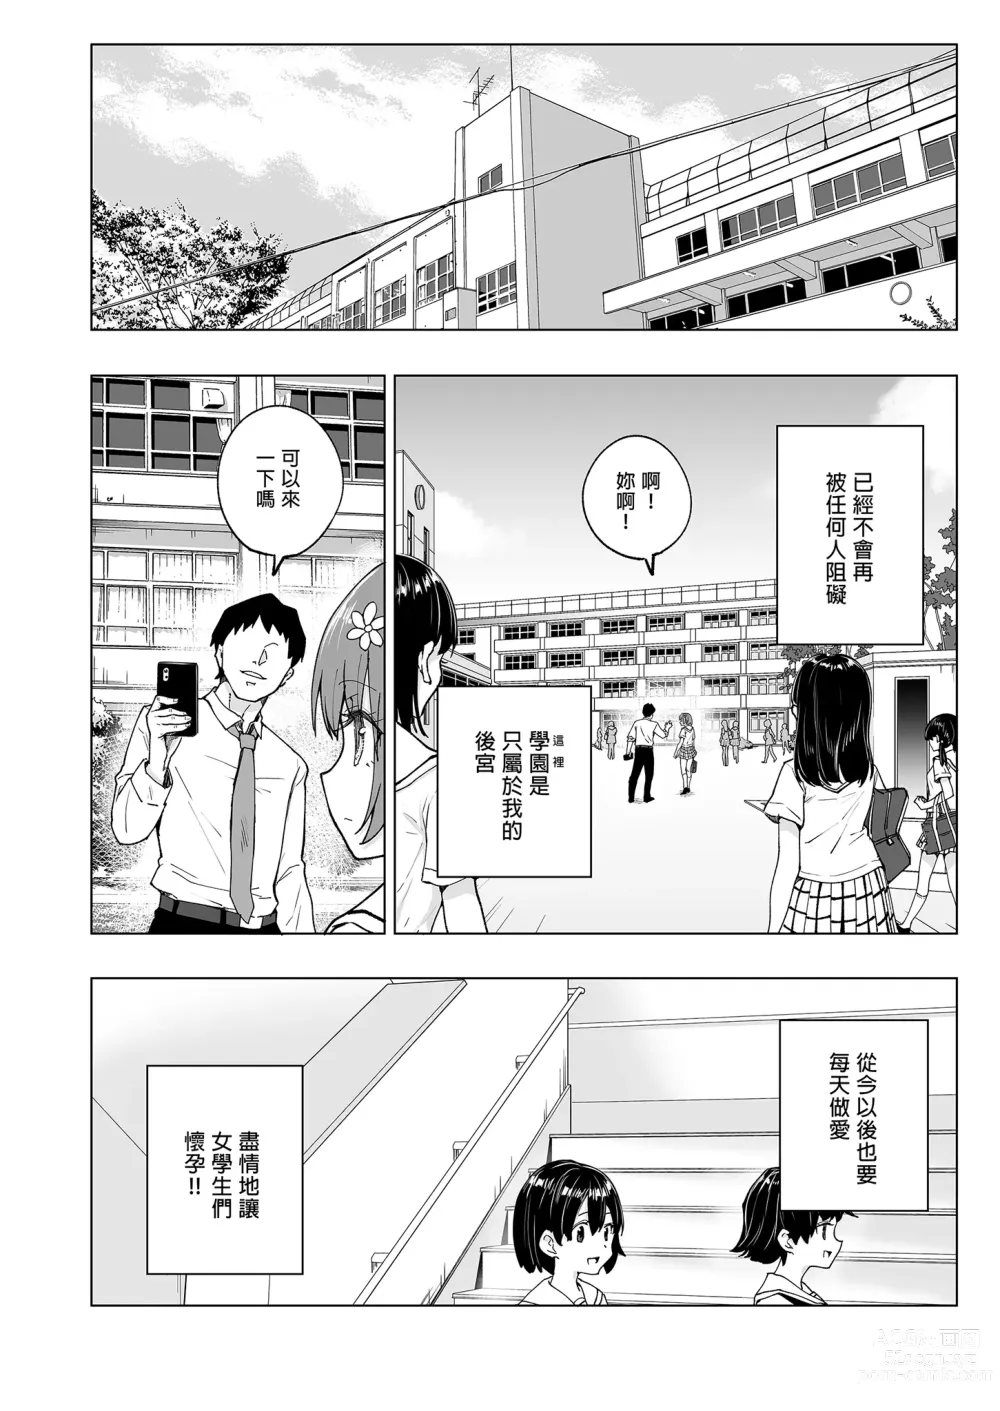 Page 320 of doujinshi _セックススマートフォン～ハーレム学園編総集編～